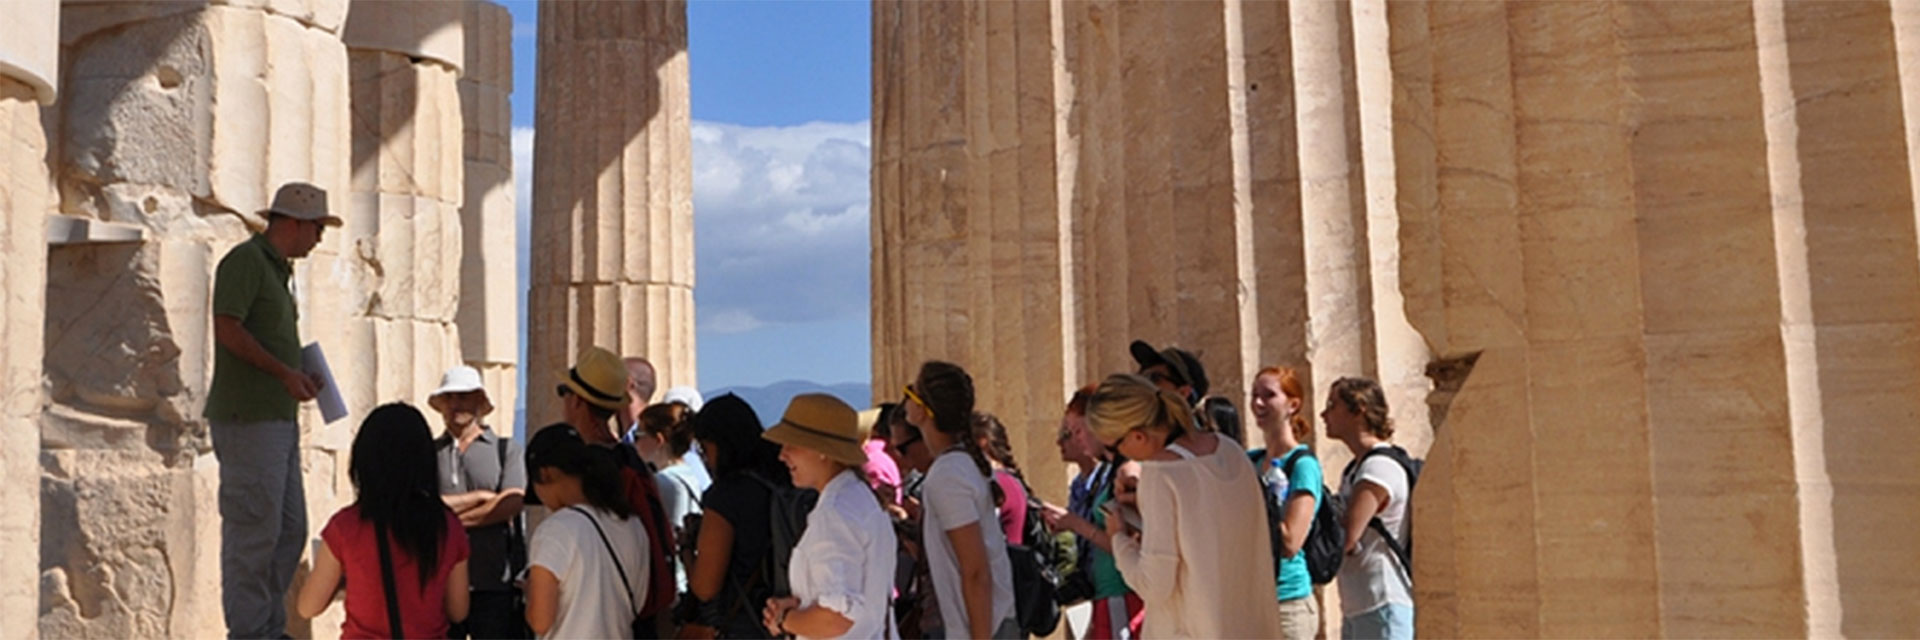 College of Design students learn about architecture in Greece.